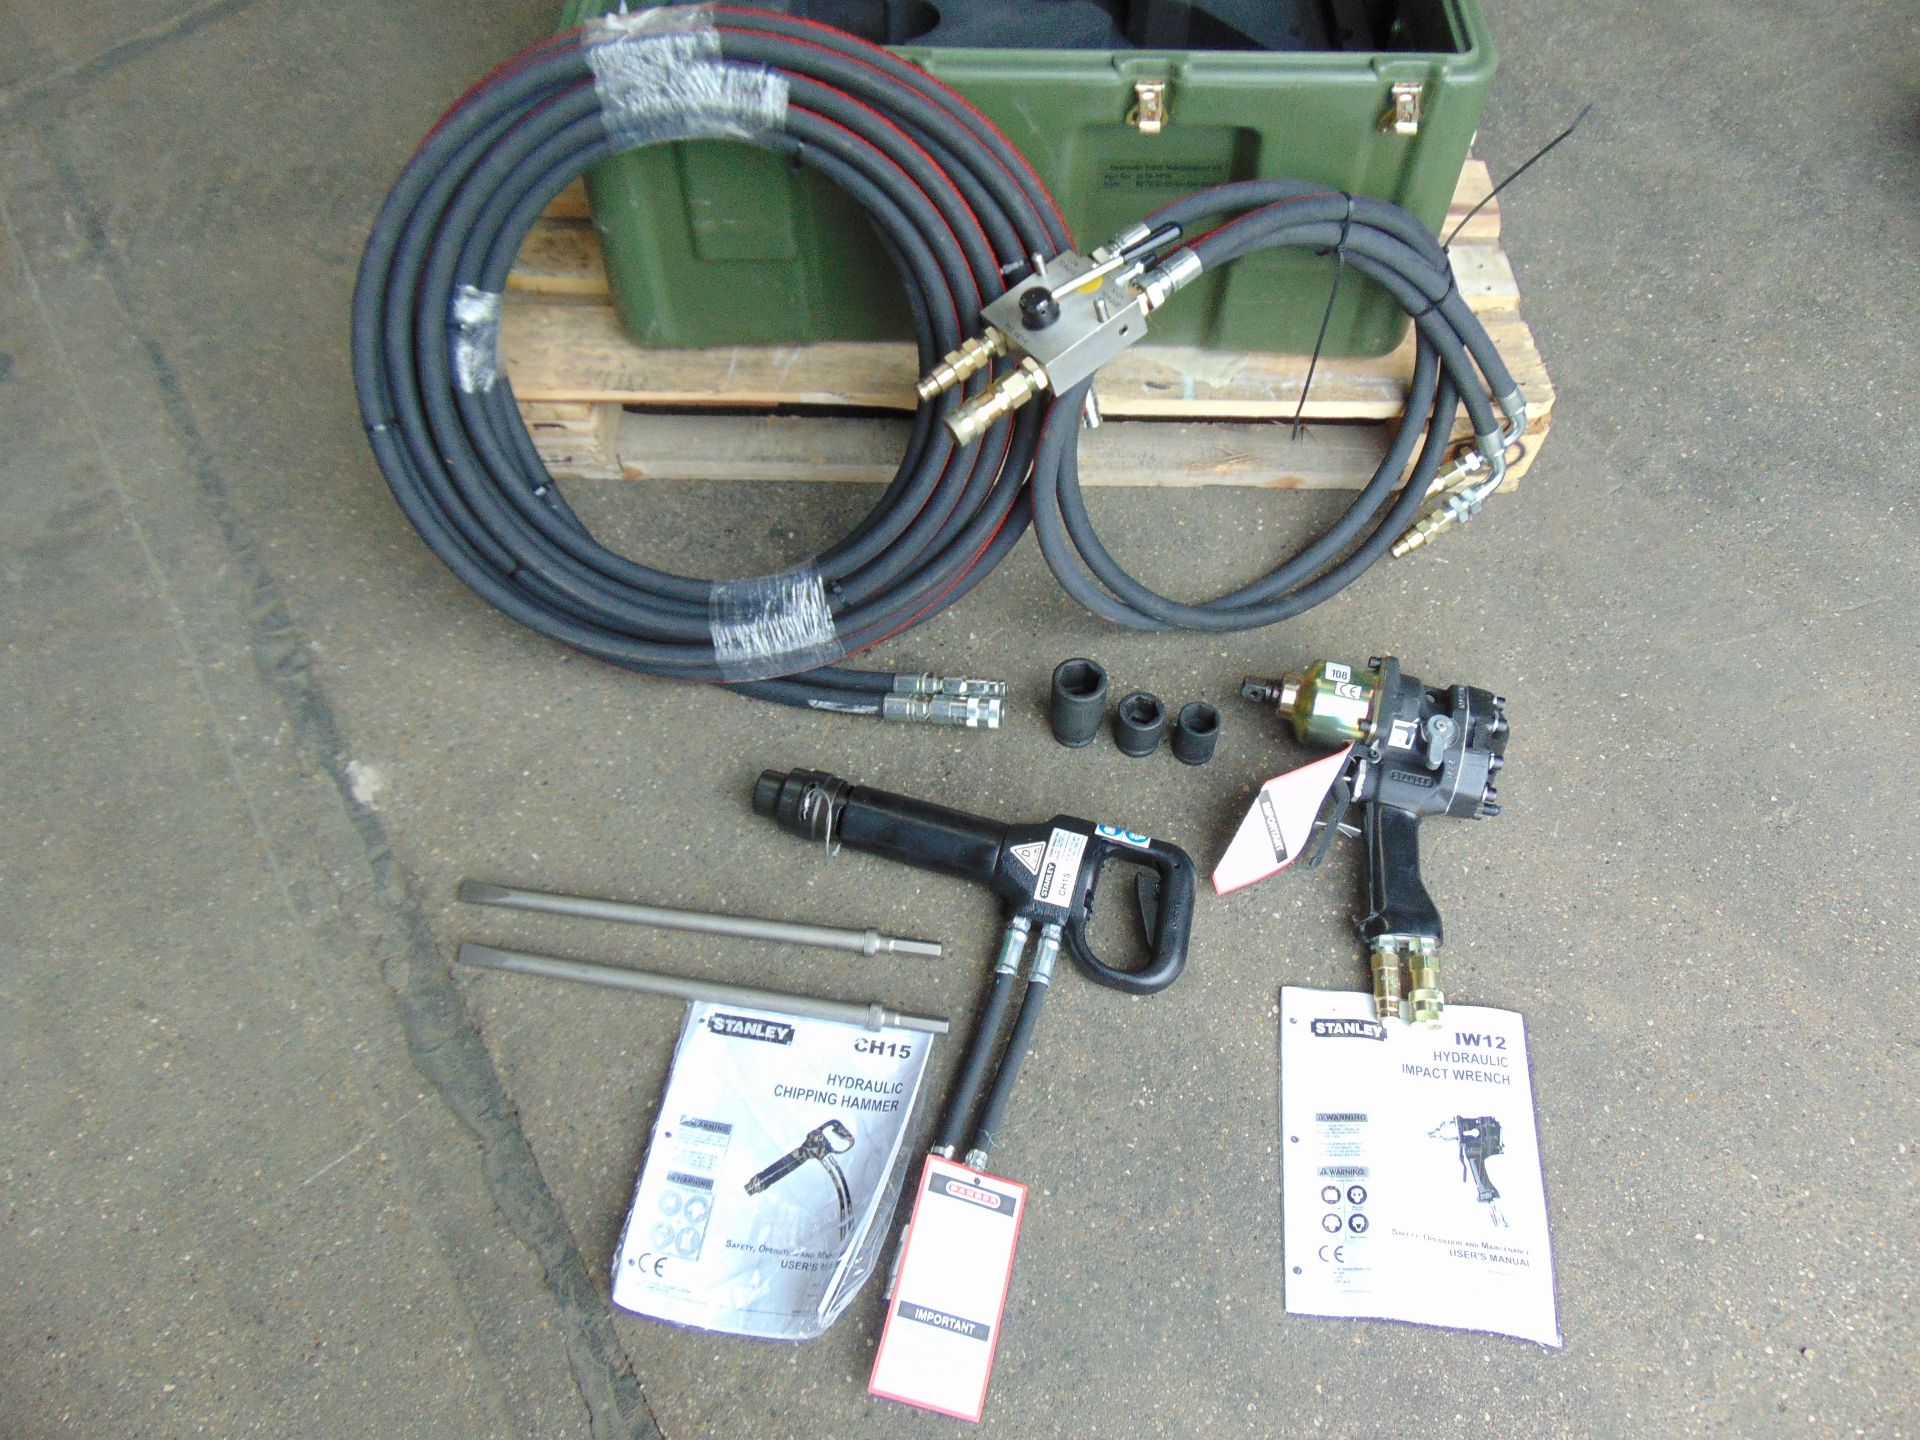 Stanley Hydraulic Maintenance Kit complete with CH15 Chipping Hammer and IW12 Impact Wrench - Bild 3 aus 19